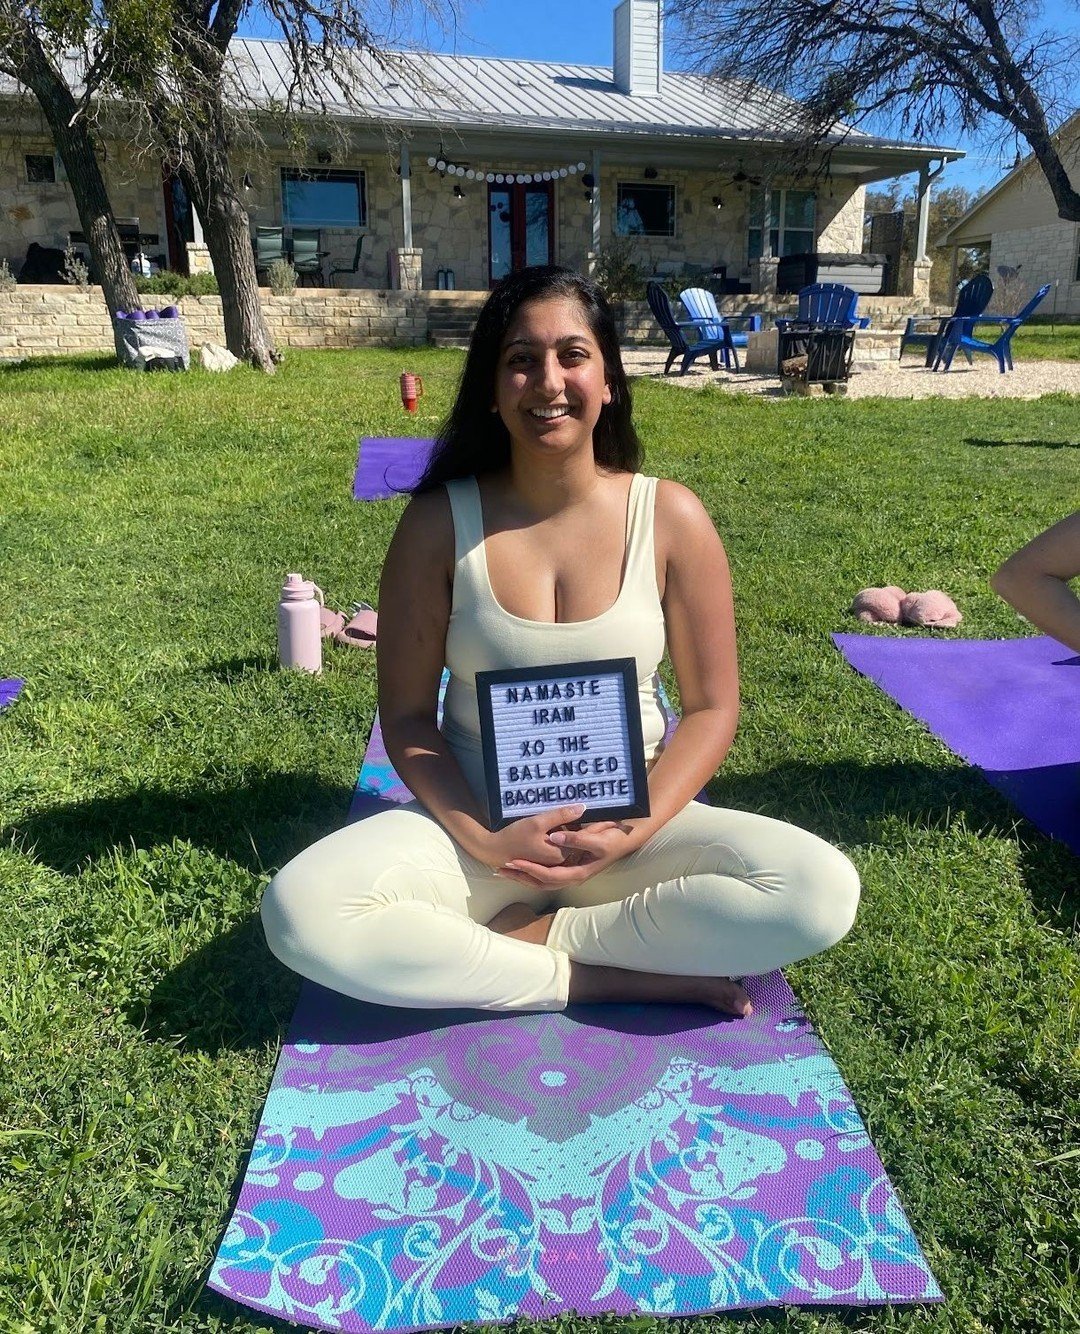 Who says bachelorette parties can't be both fun and zen? 🧘&zwj;♀️🥂 ⁠
⁠
With The Balanced Bachelorette, you can have the best of both worlds! Enjoy a rejuvenating yoga class that caters to your group's vibe, whether you're all pumped up or need some